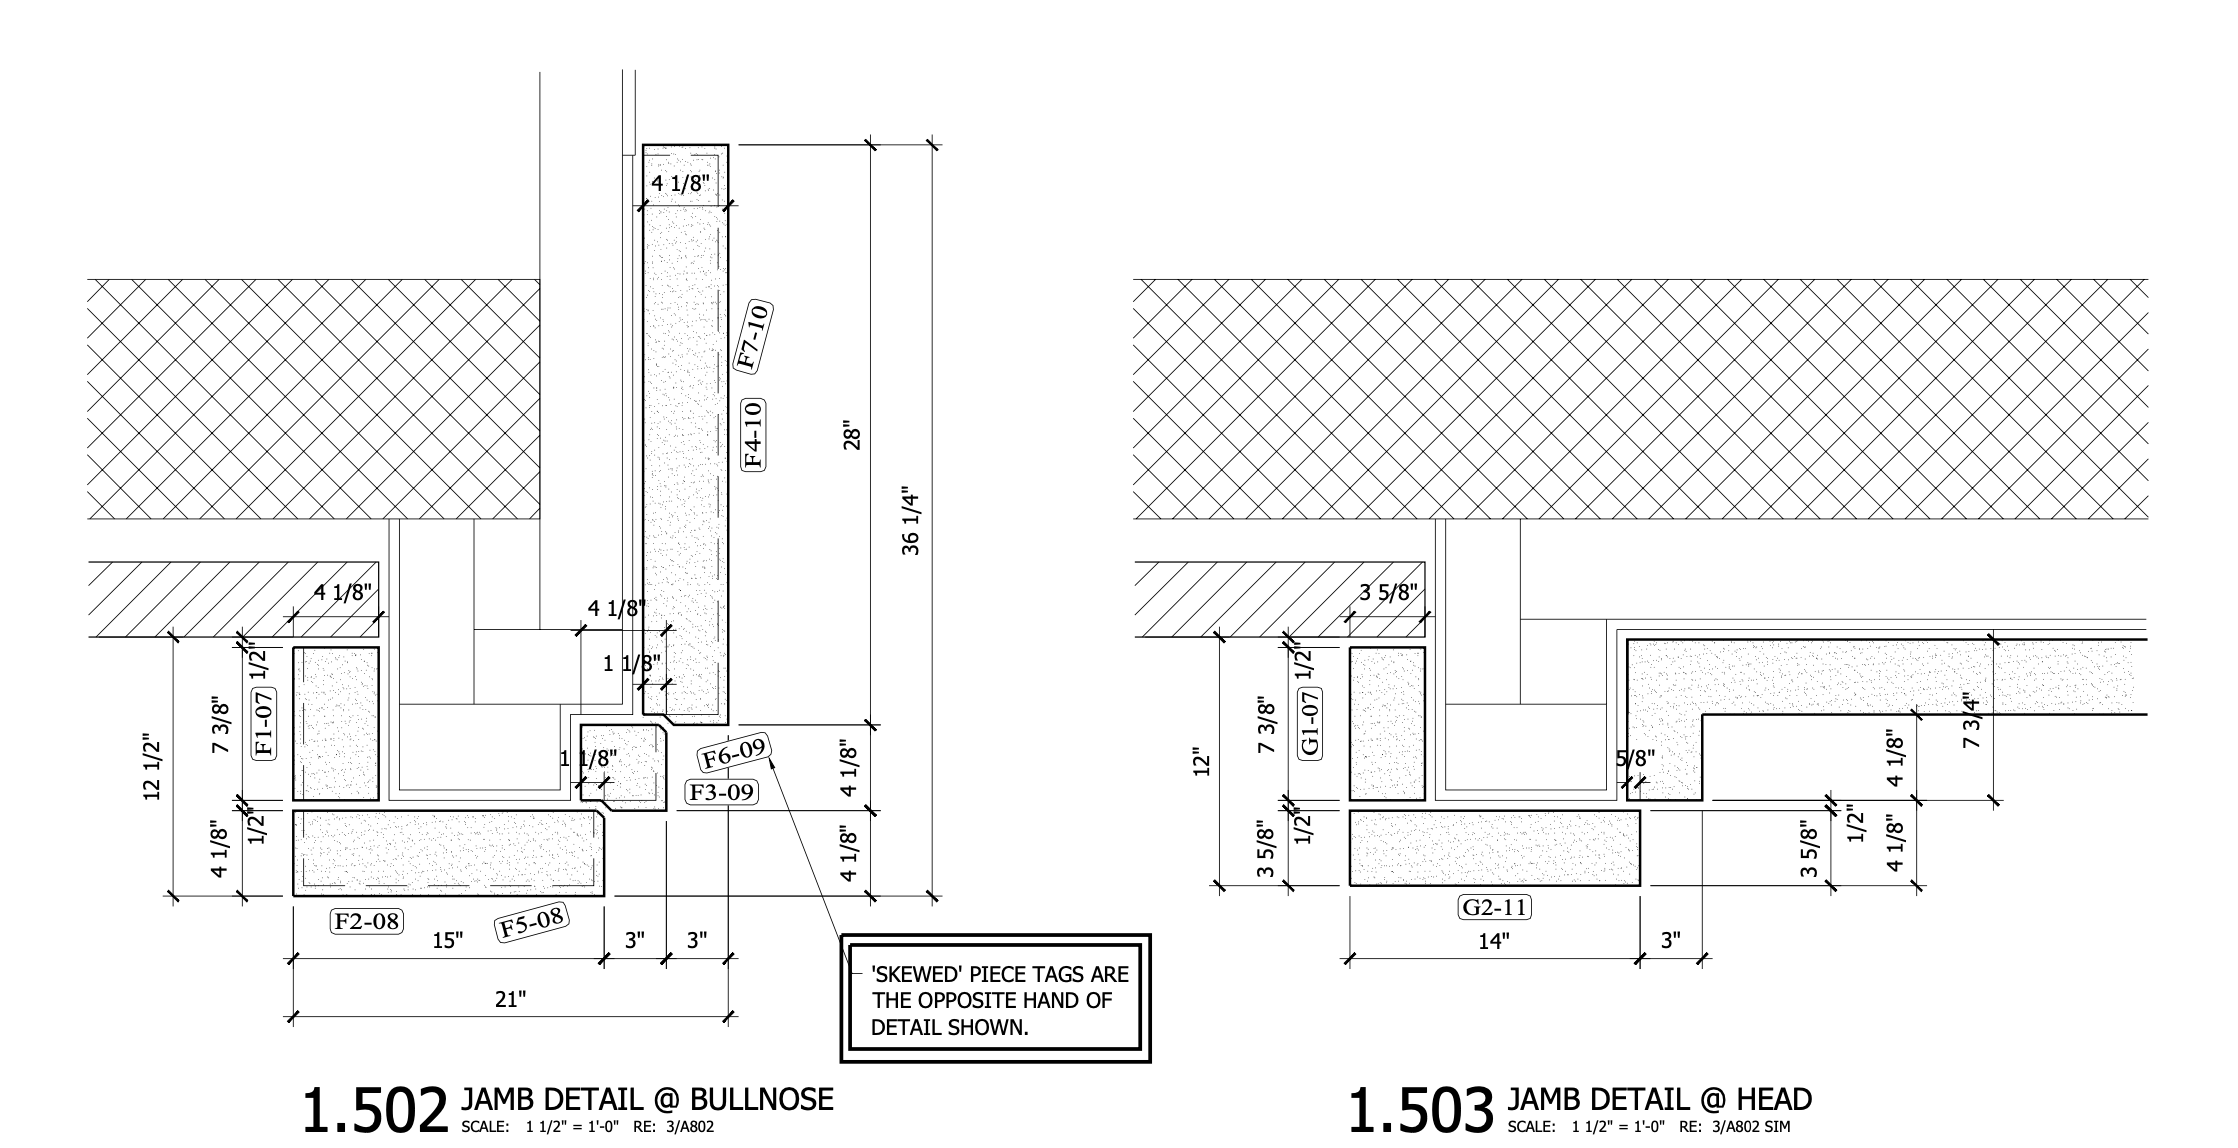 CAD Drawings for a couple of cross-sections from one entryway surround trim design